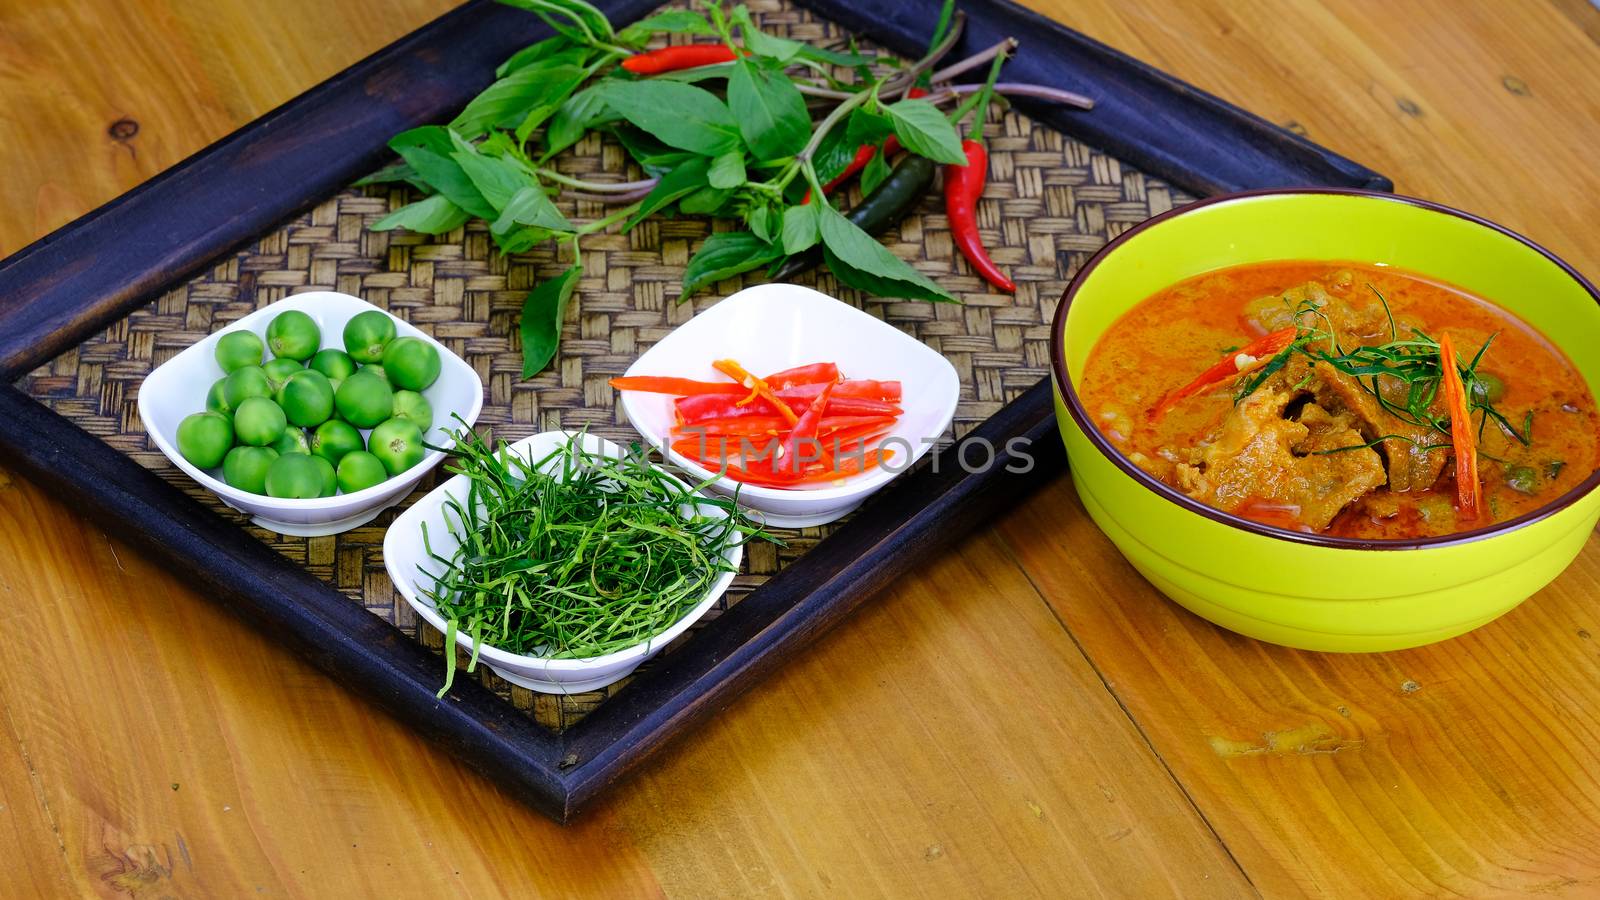 Ingredients for making famouse Thai (panang) dish include, red and green chilli, holy basil leaves, kaffir lime leaves, and turkey berry